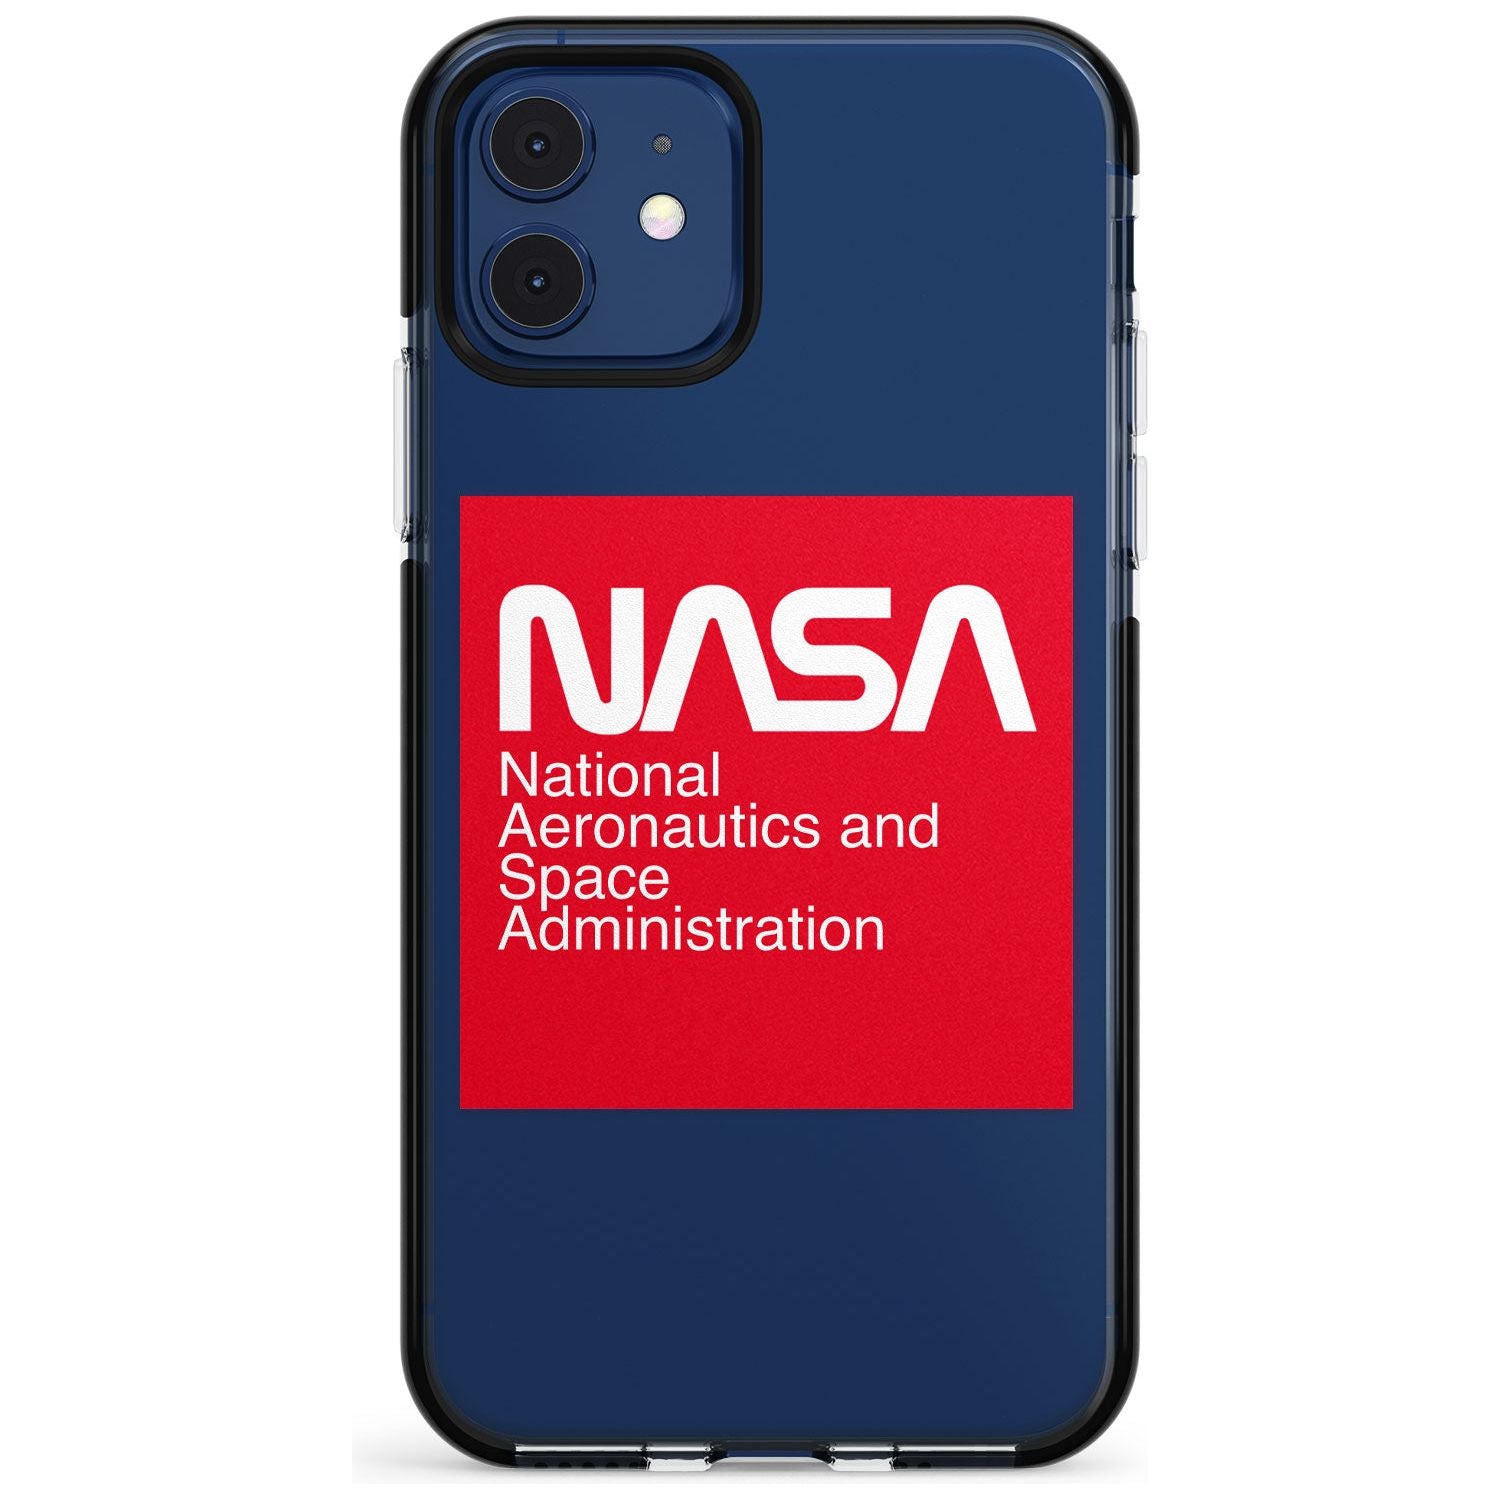 NASA The Worm Box Black Impact Phone Case for iPhone 11 Pro Max